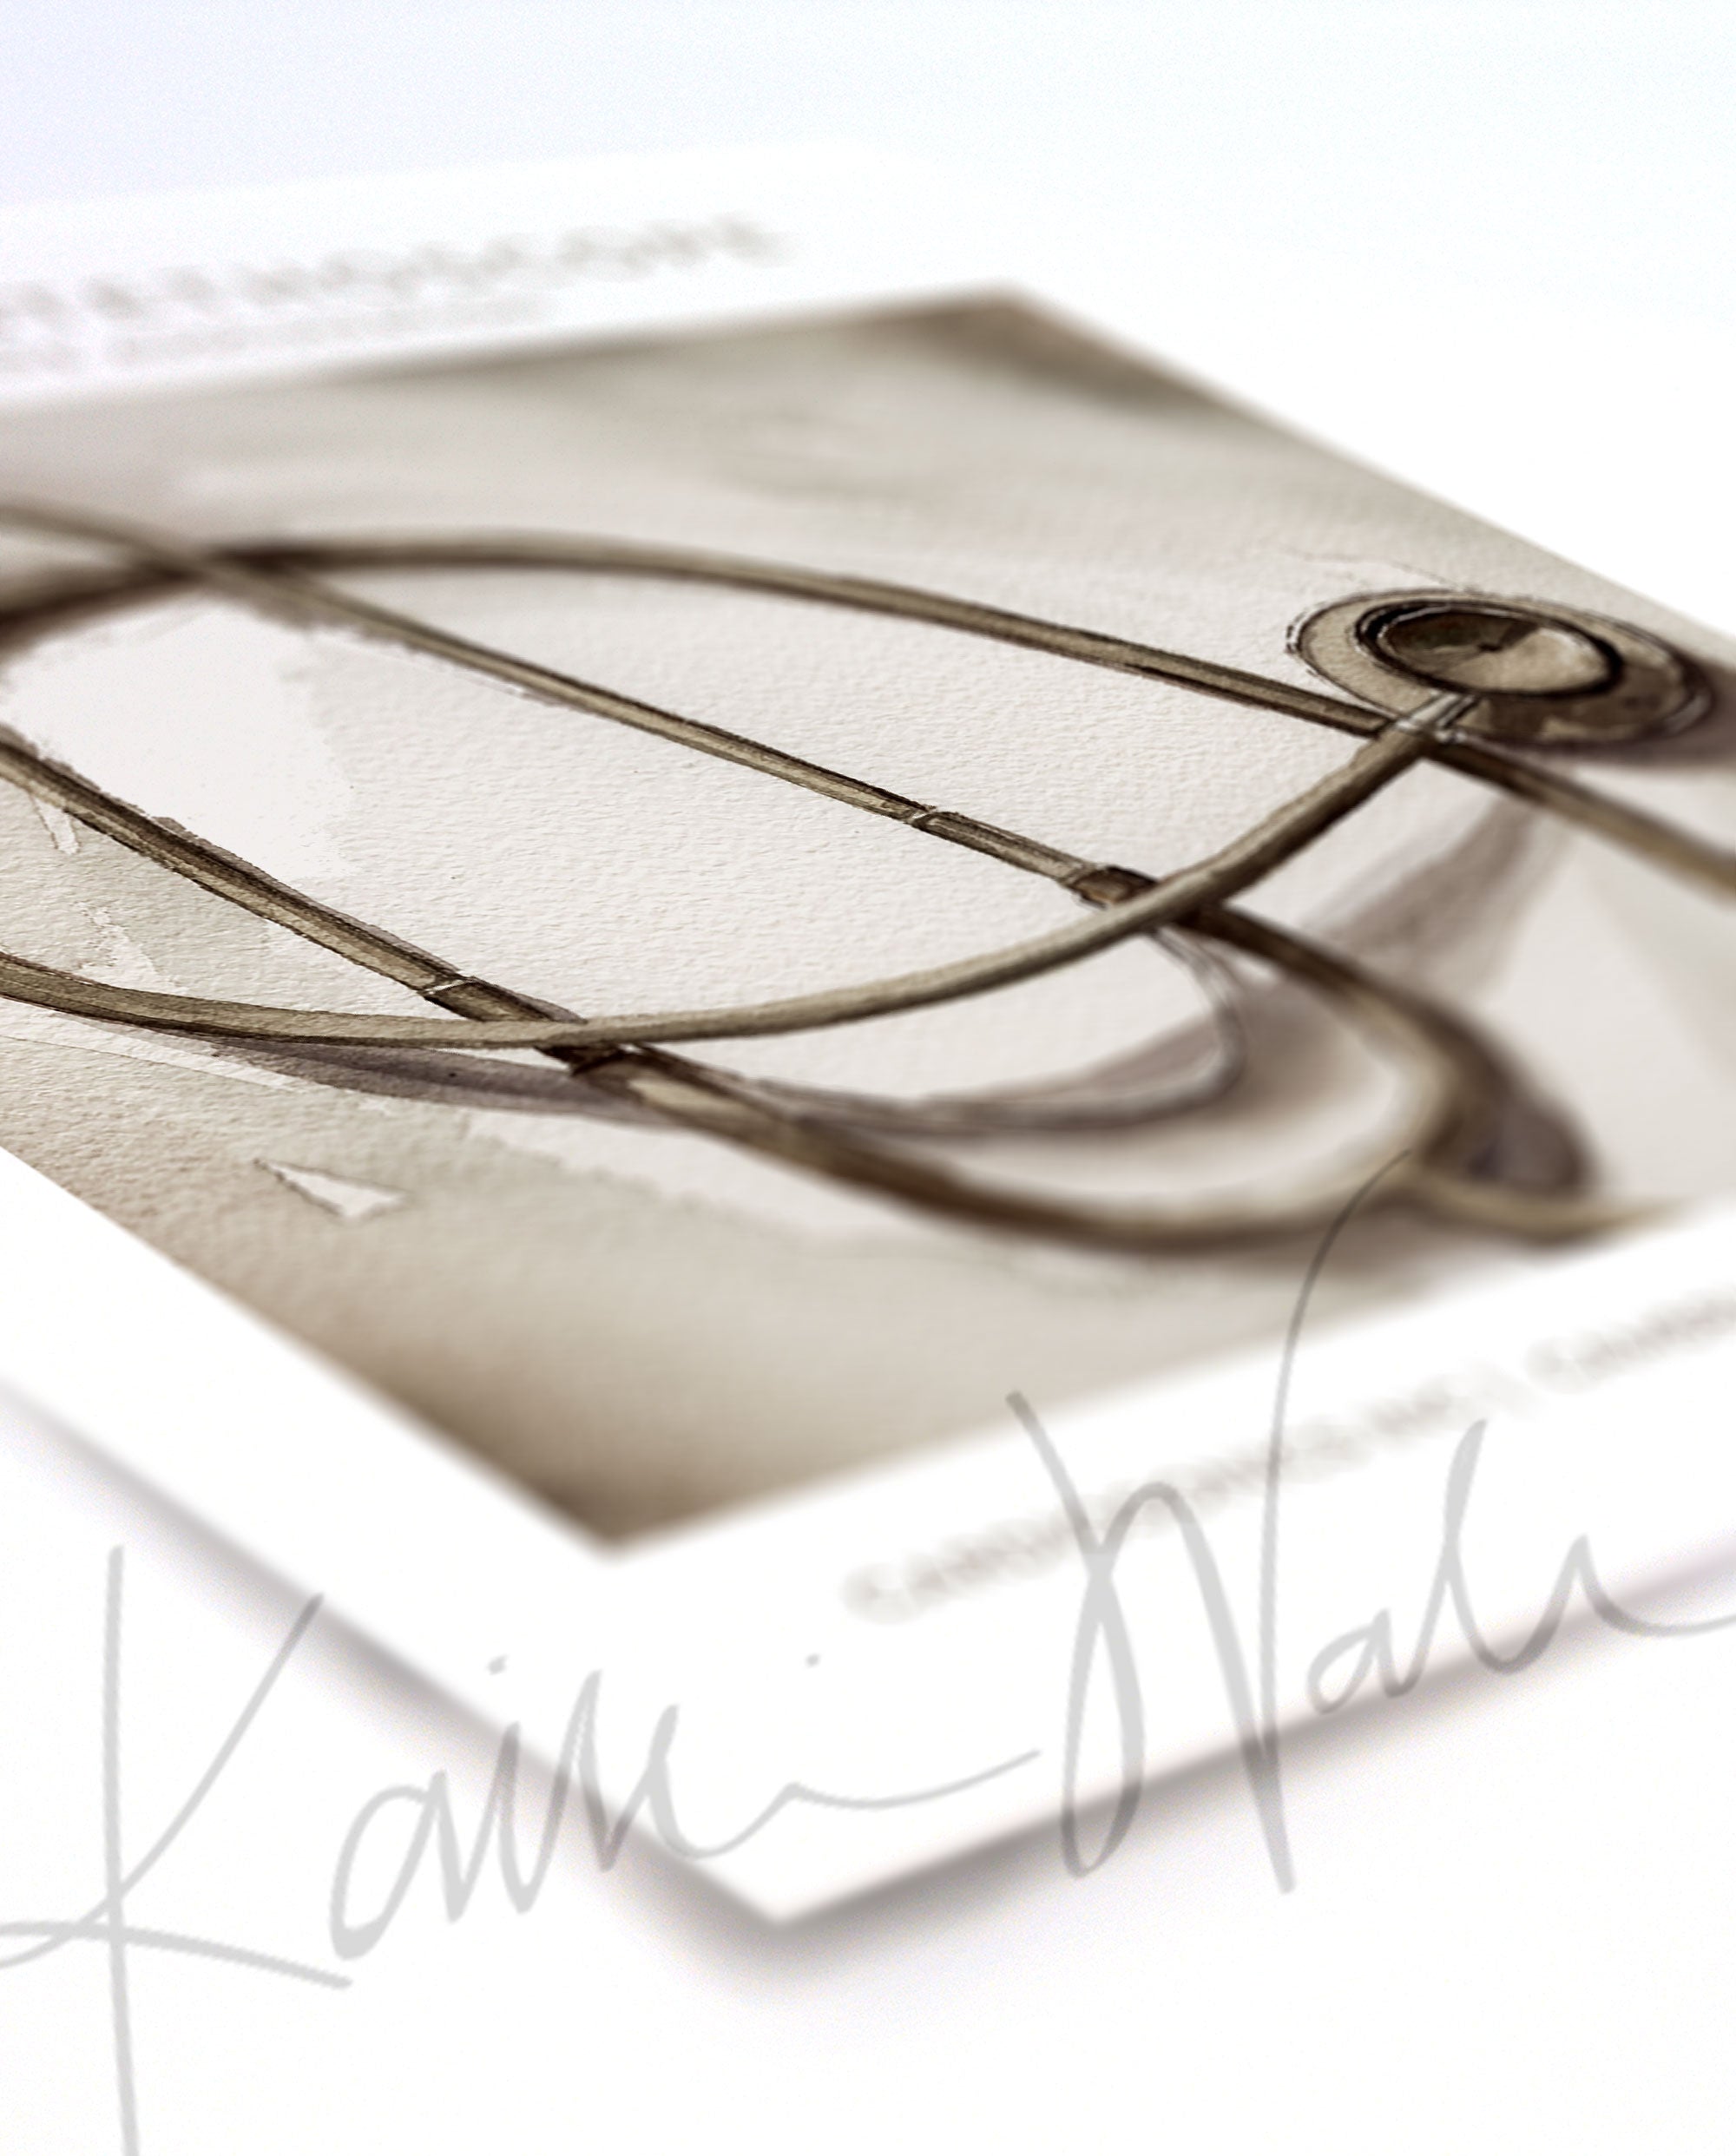 Angled view of a watercolor painting of a Littmann stethoscope with information on it in an antique style